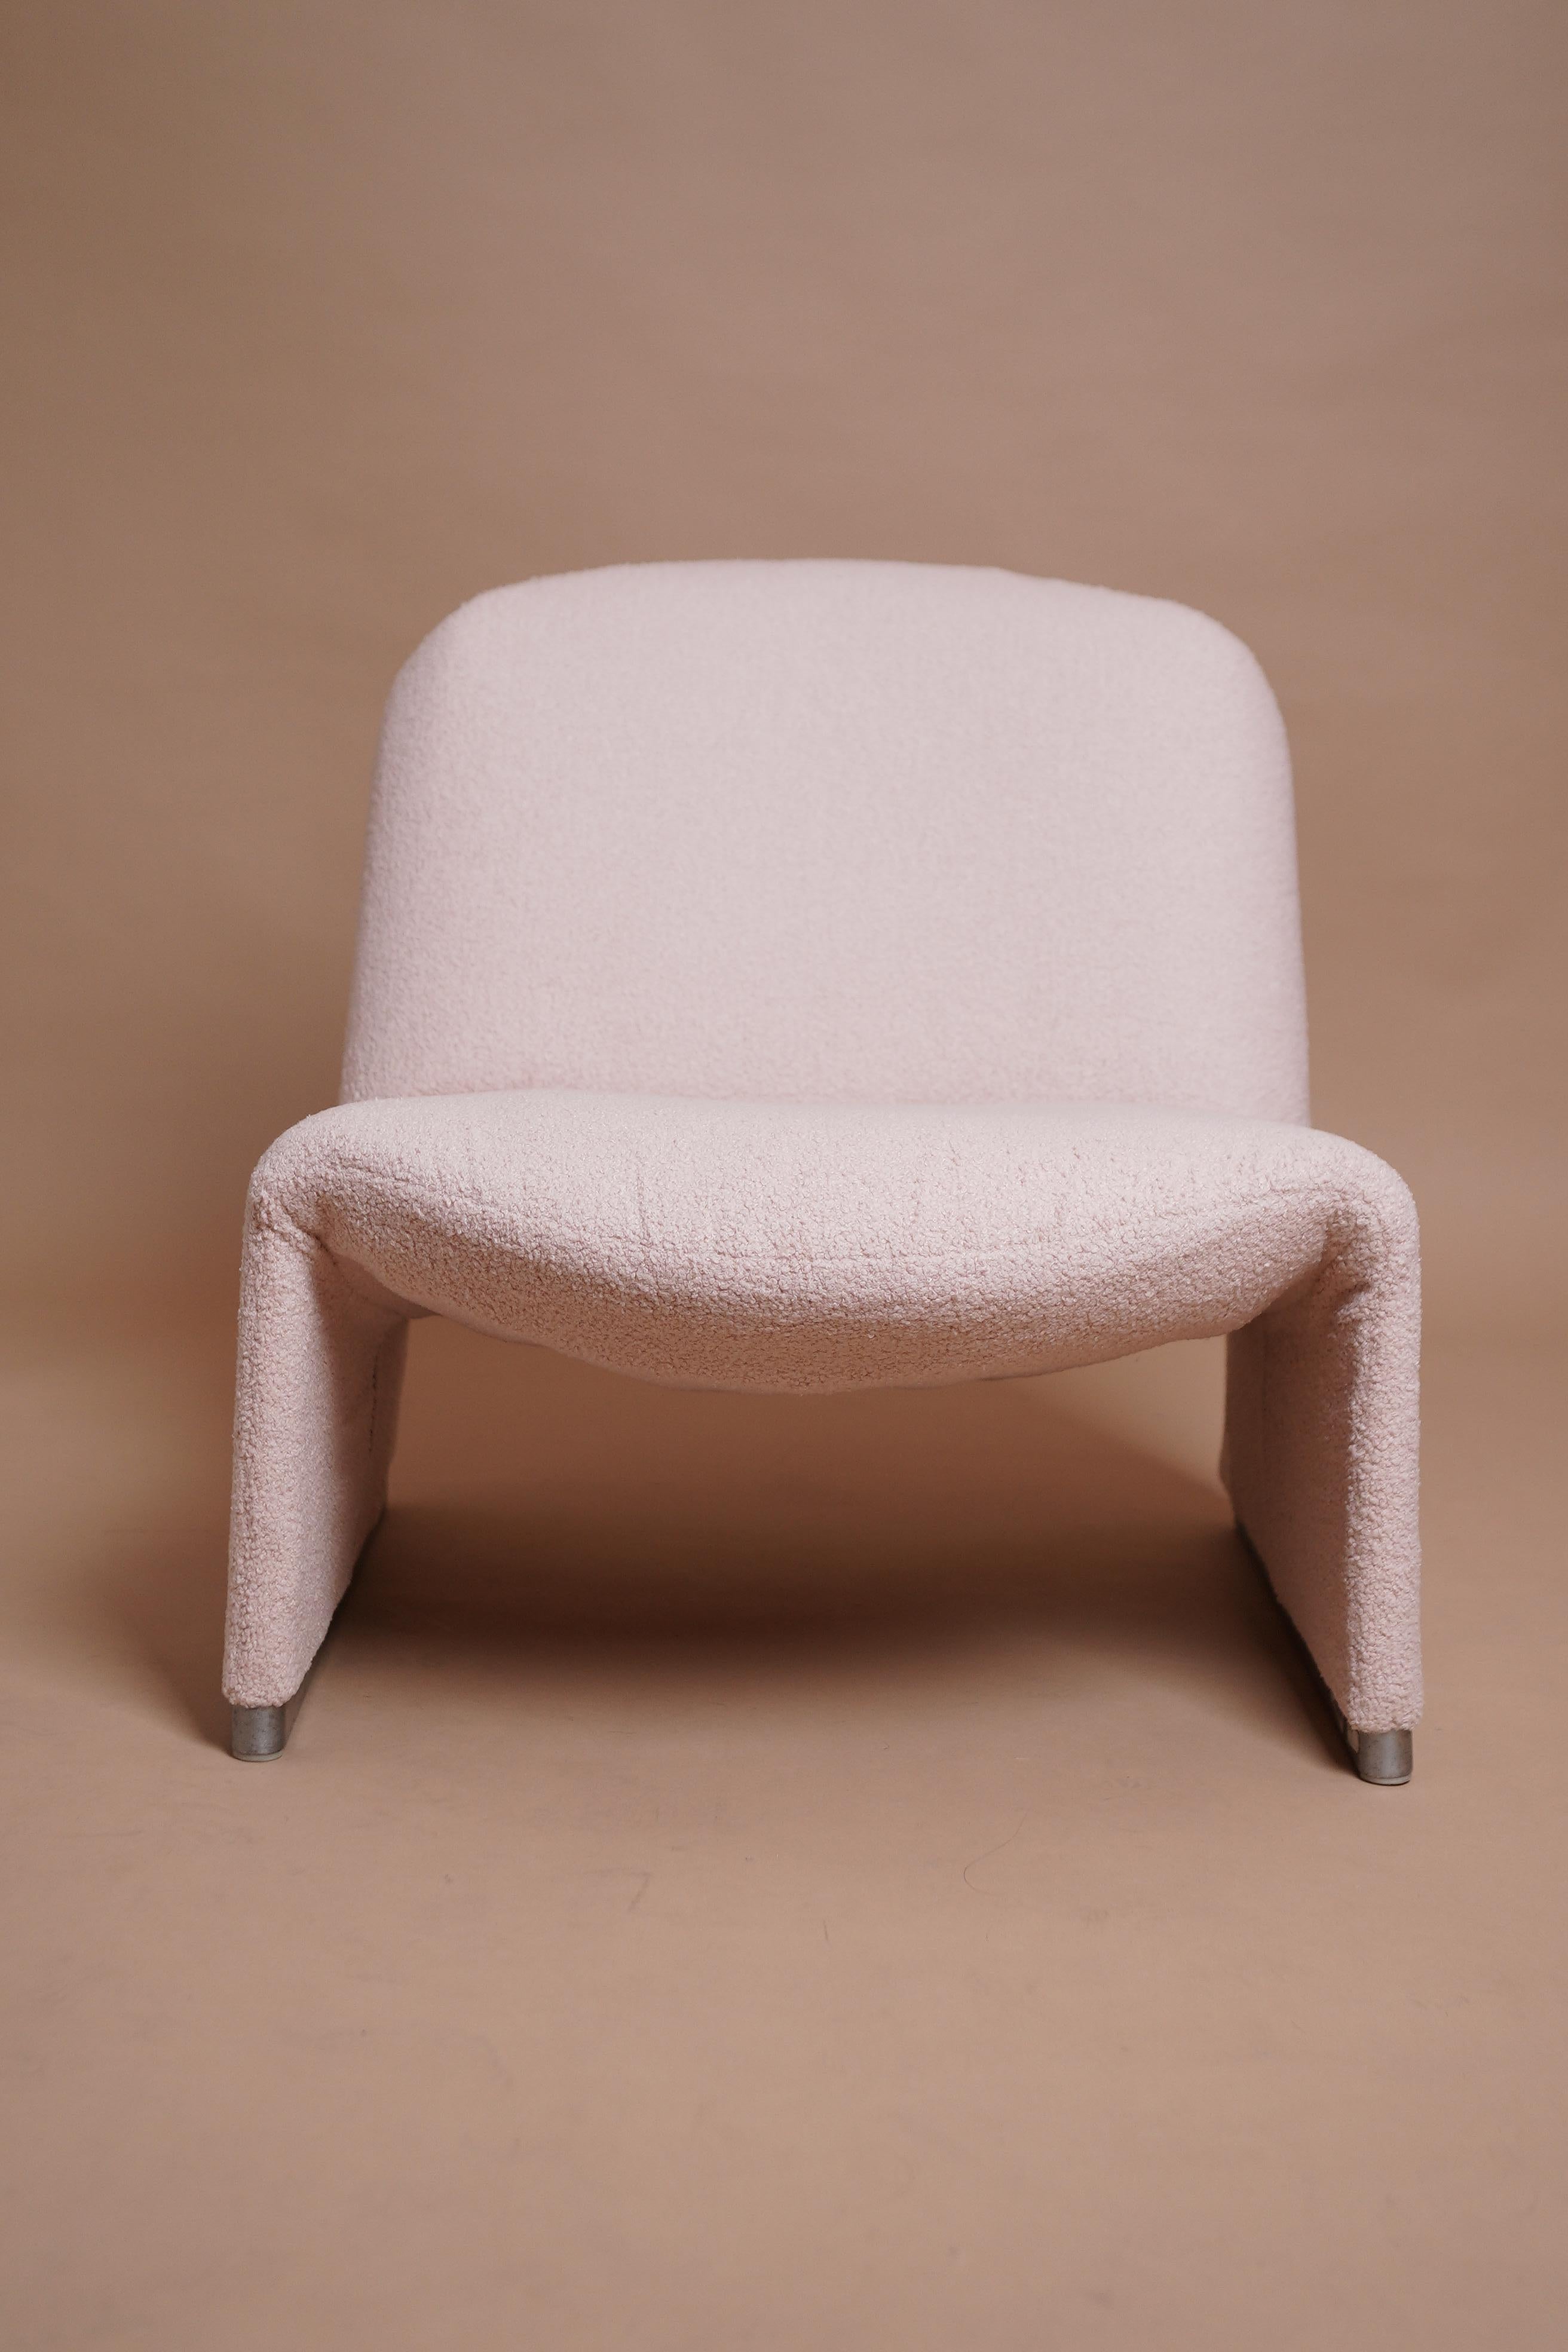 Alky Chair By Giancarlo Piretti for Castelli 1970s For Sale 1